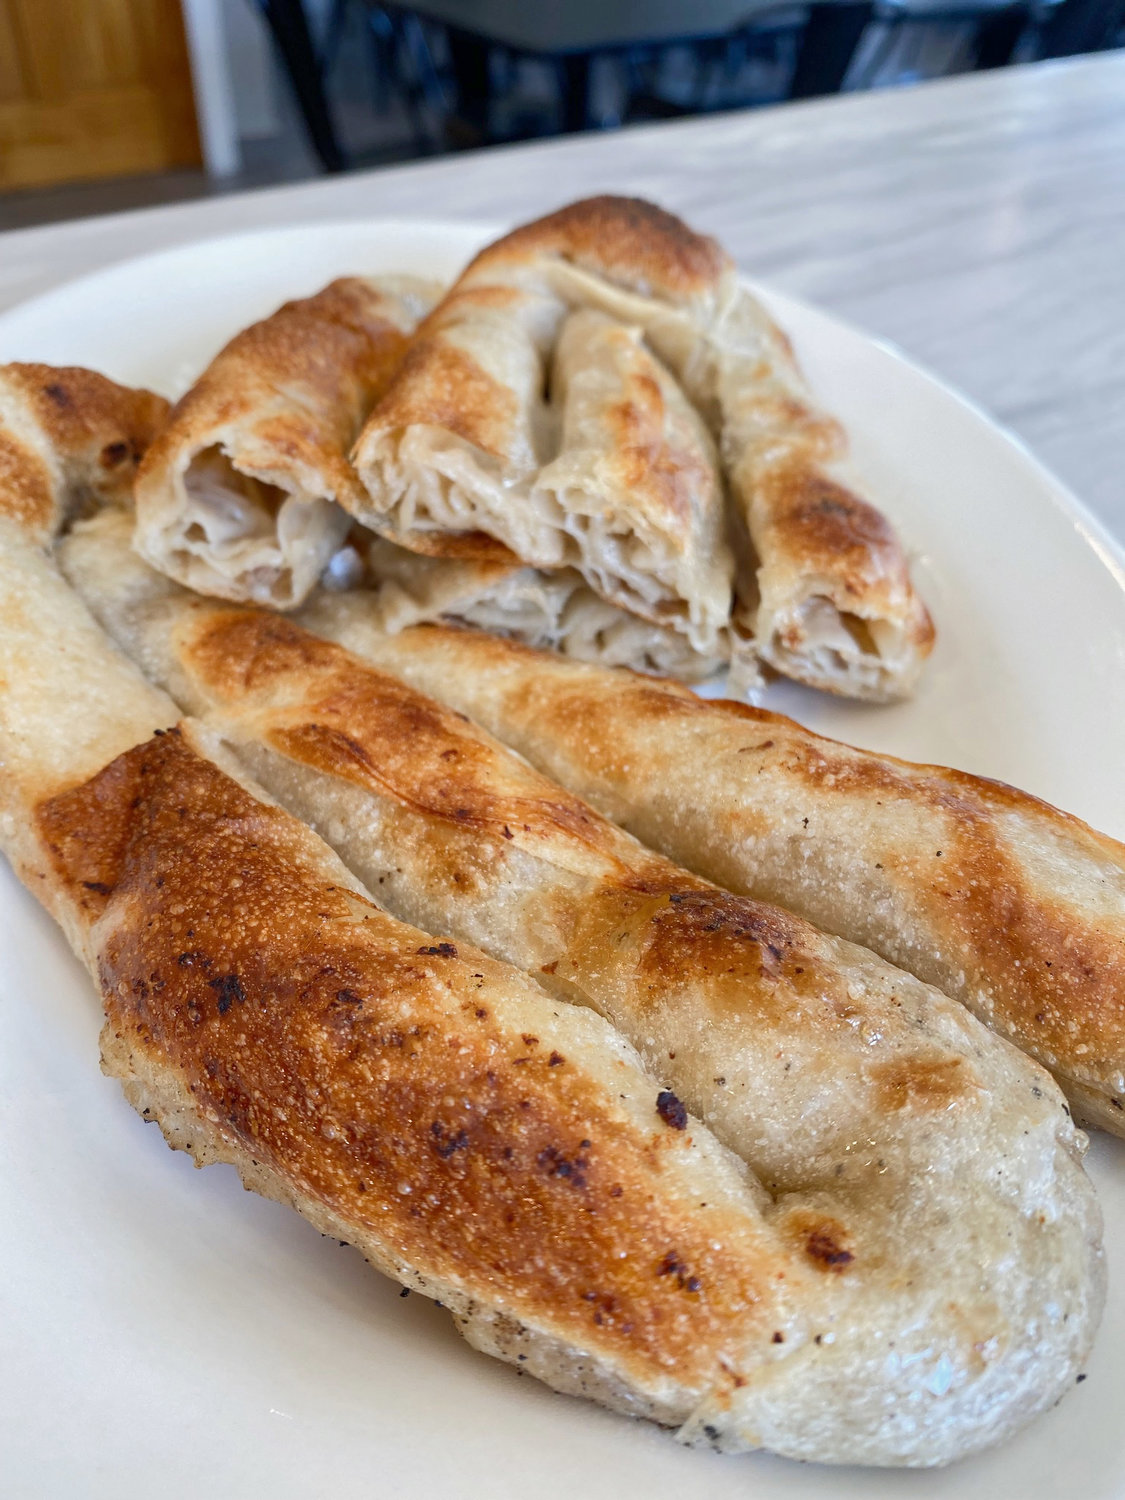 Burek is a traditional Bosnian cuisine and a street food specialty that will find its way to the New York State Fair thanks to Balkan Street Food of Utica.